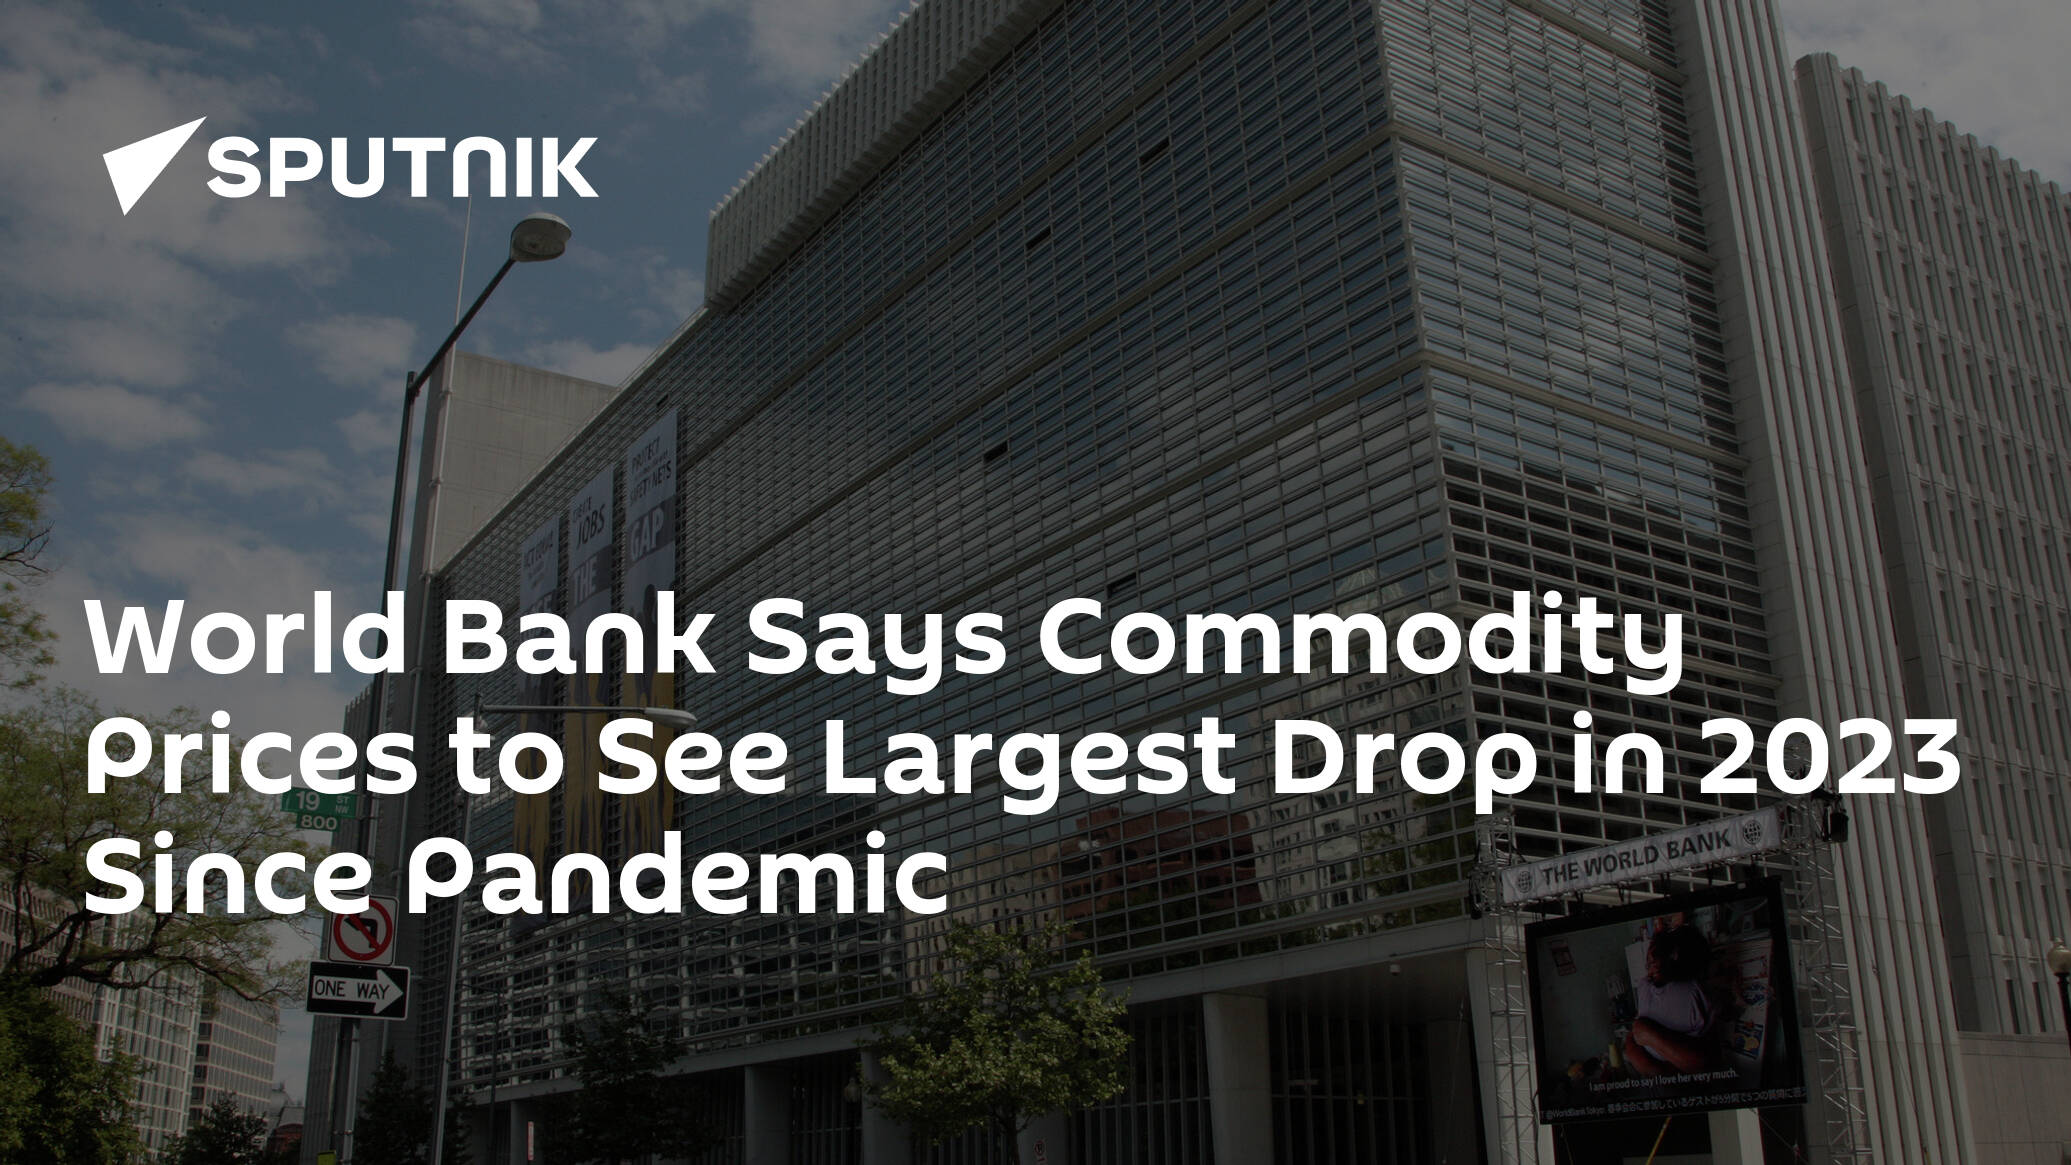 World Bank Says Commodity Prices to See Largest Drop in 2023 Since Pandemic